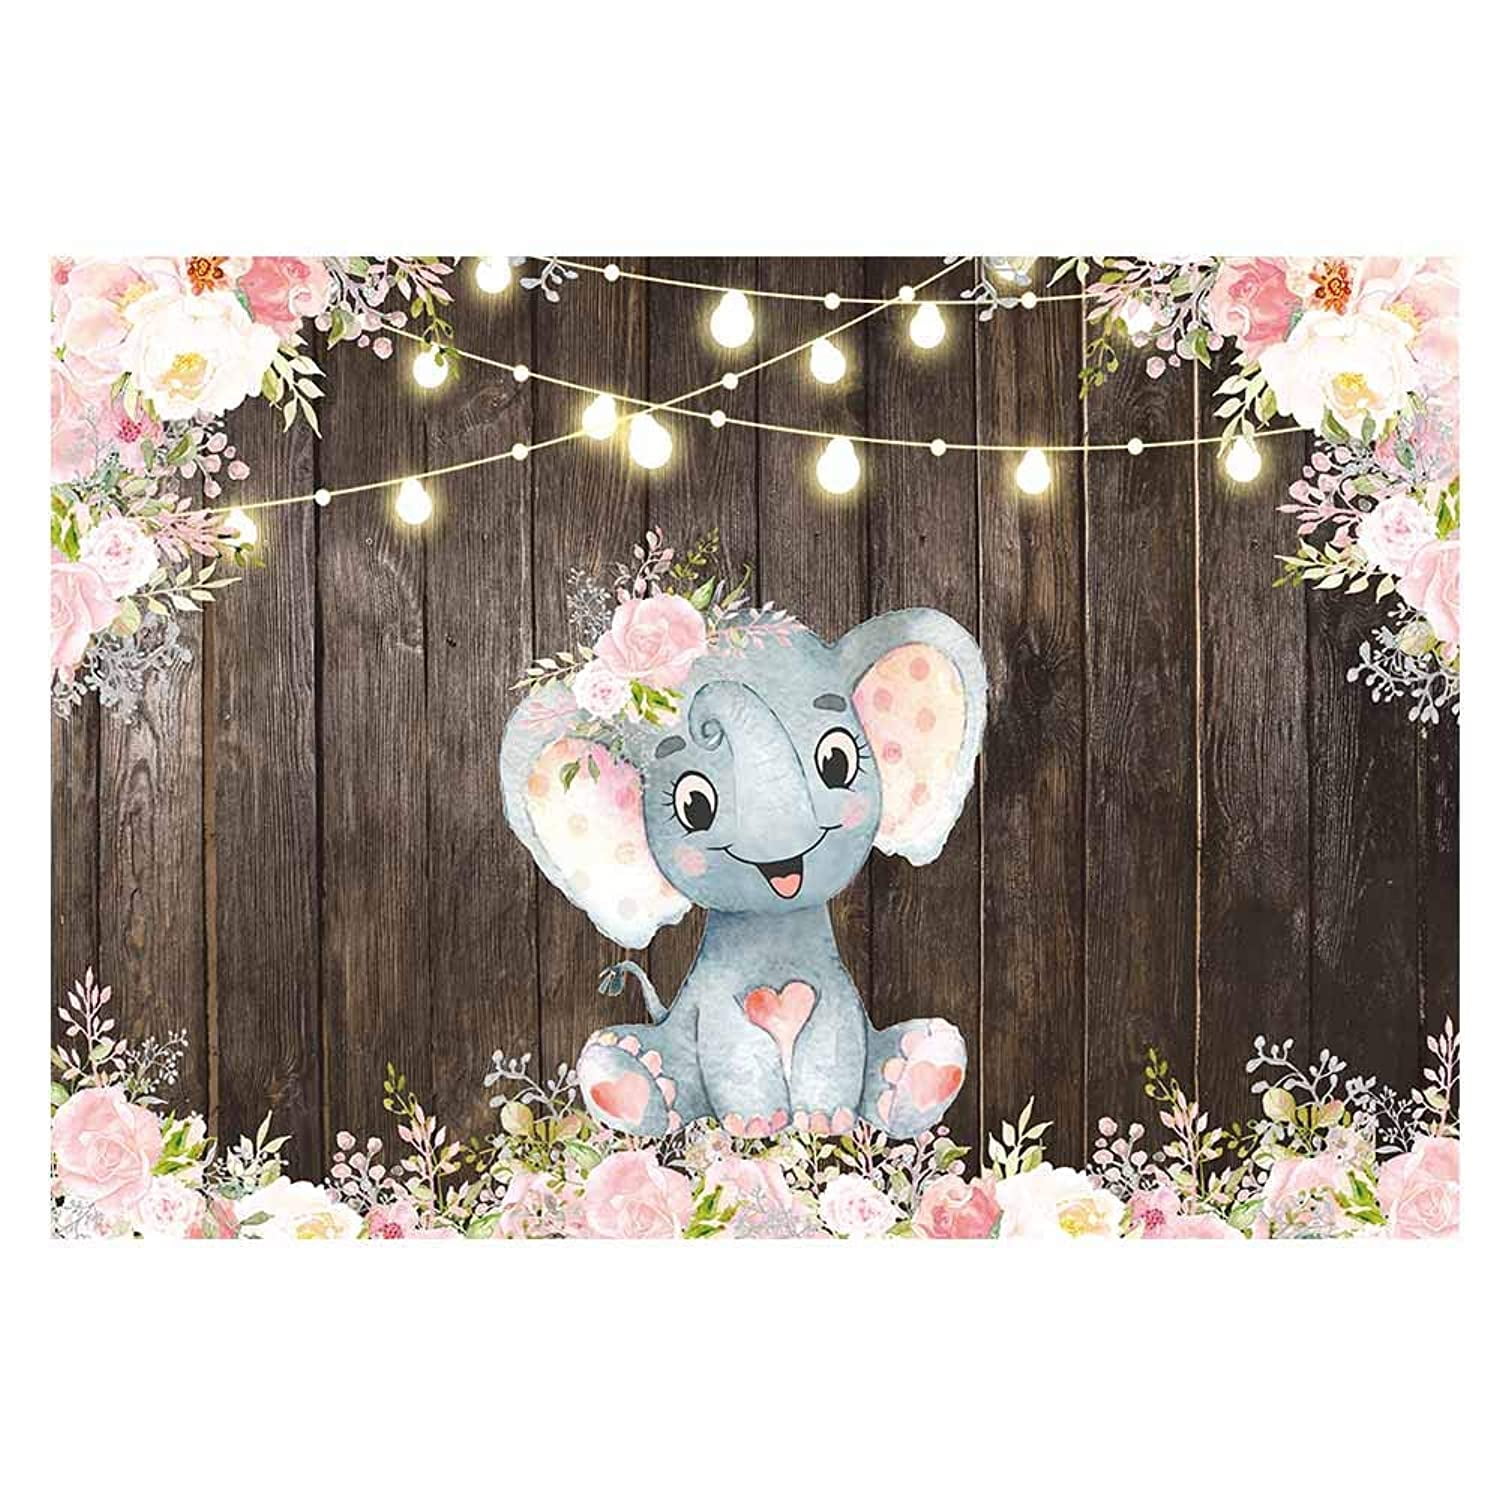 Funnytree 7x5ft Pink Floral Elephant Party Backdrop Flowers Girl Baby Shower Birthday Photography Background Photobooth Banner Cake Table Decorations 